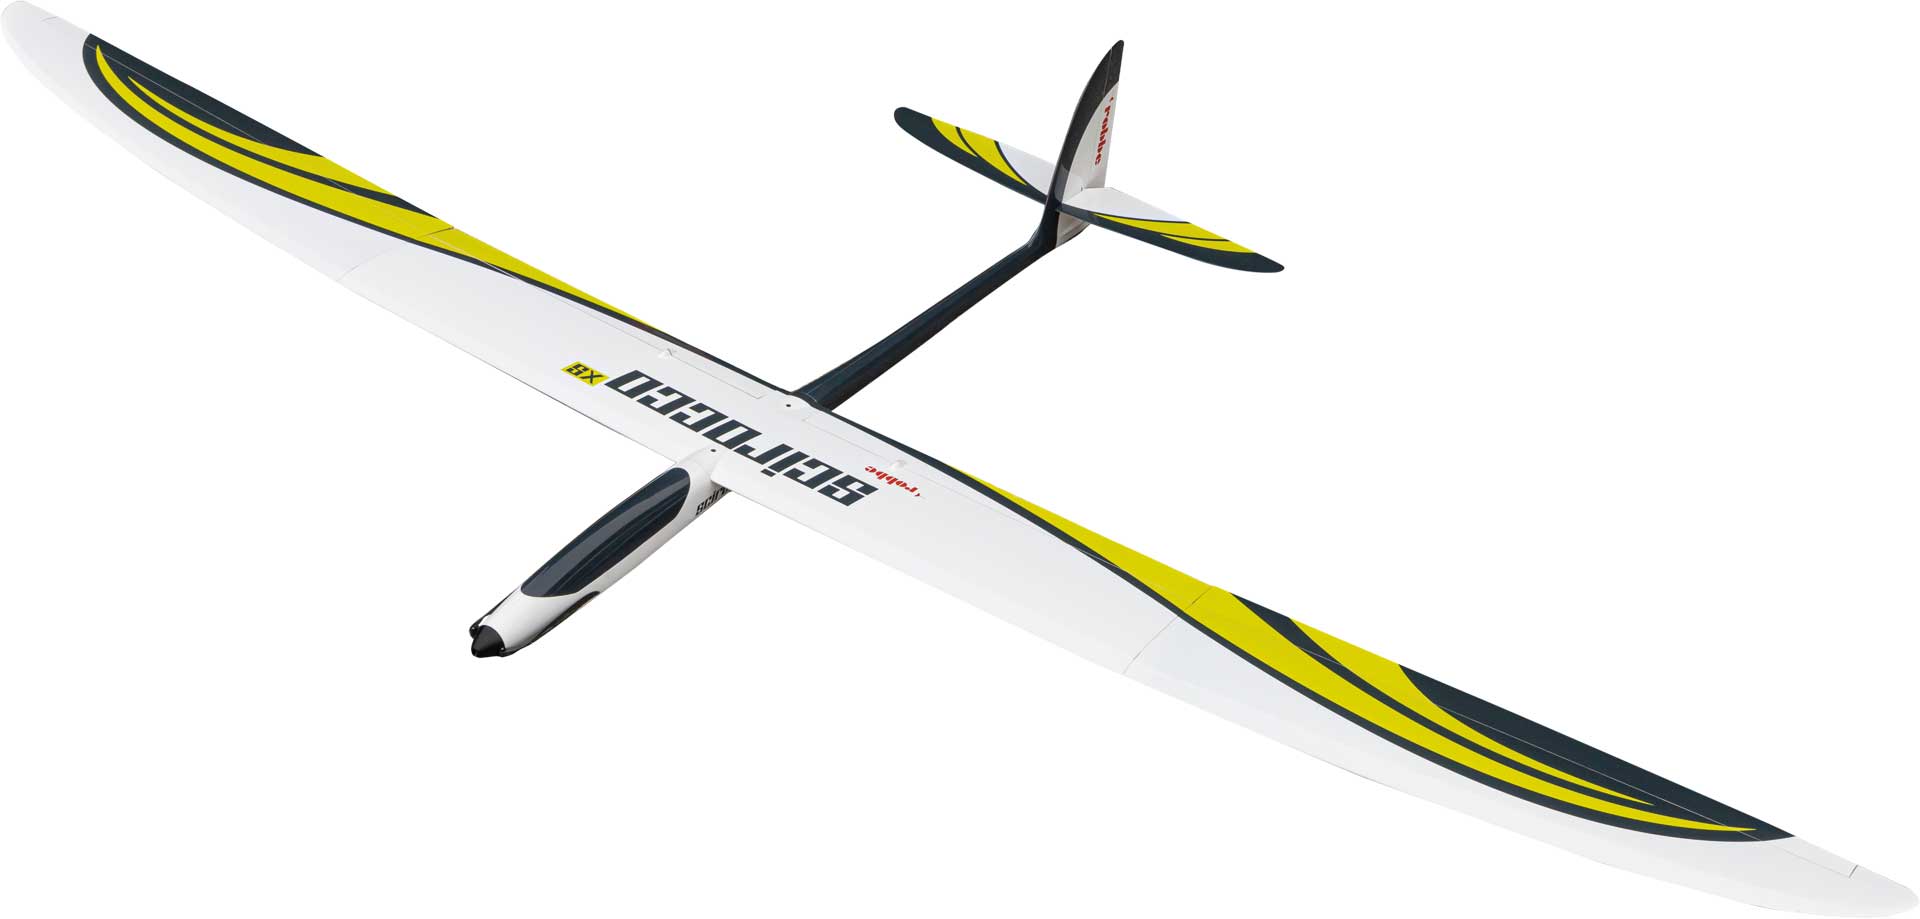 Robbe Modellsport Scirocco XS 3.25m ARF (lime) Full-GFRP High performance glider with 4 flap wings